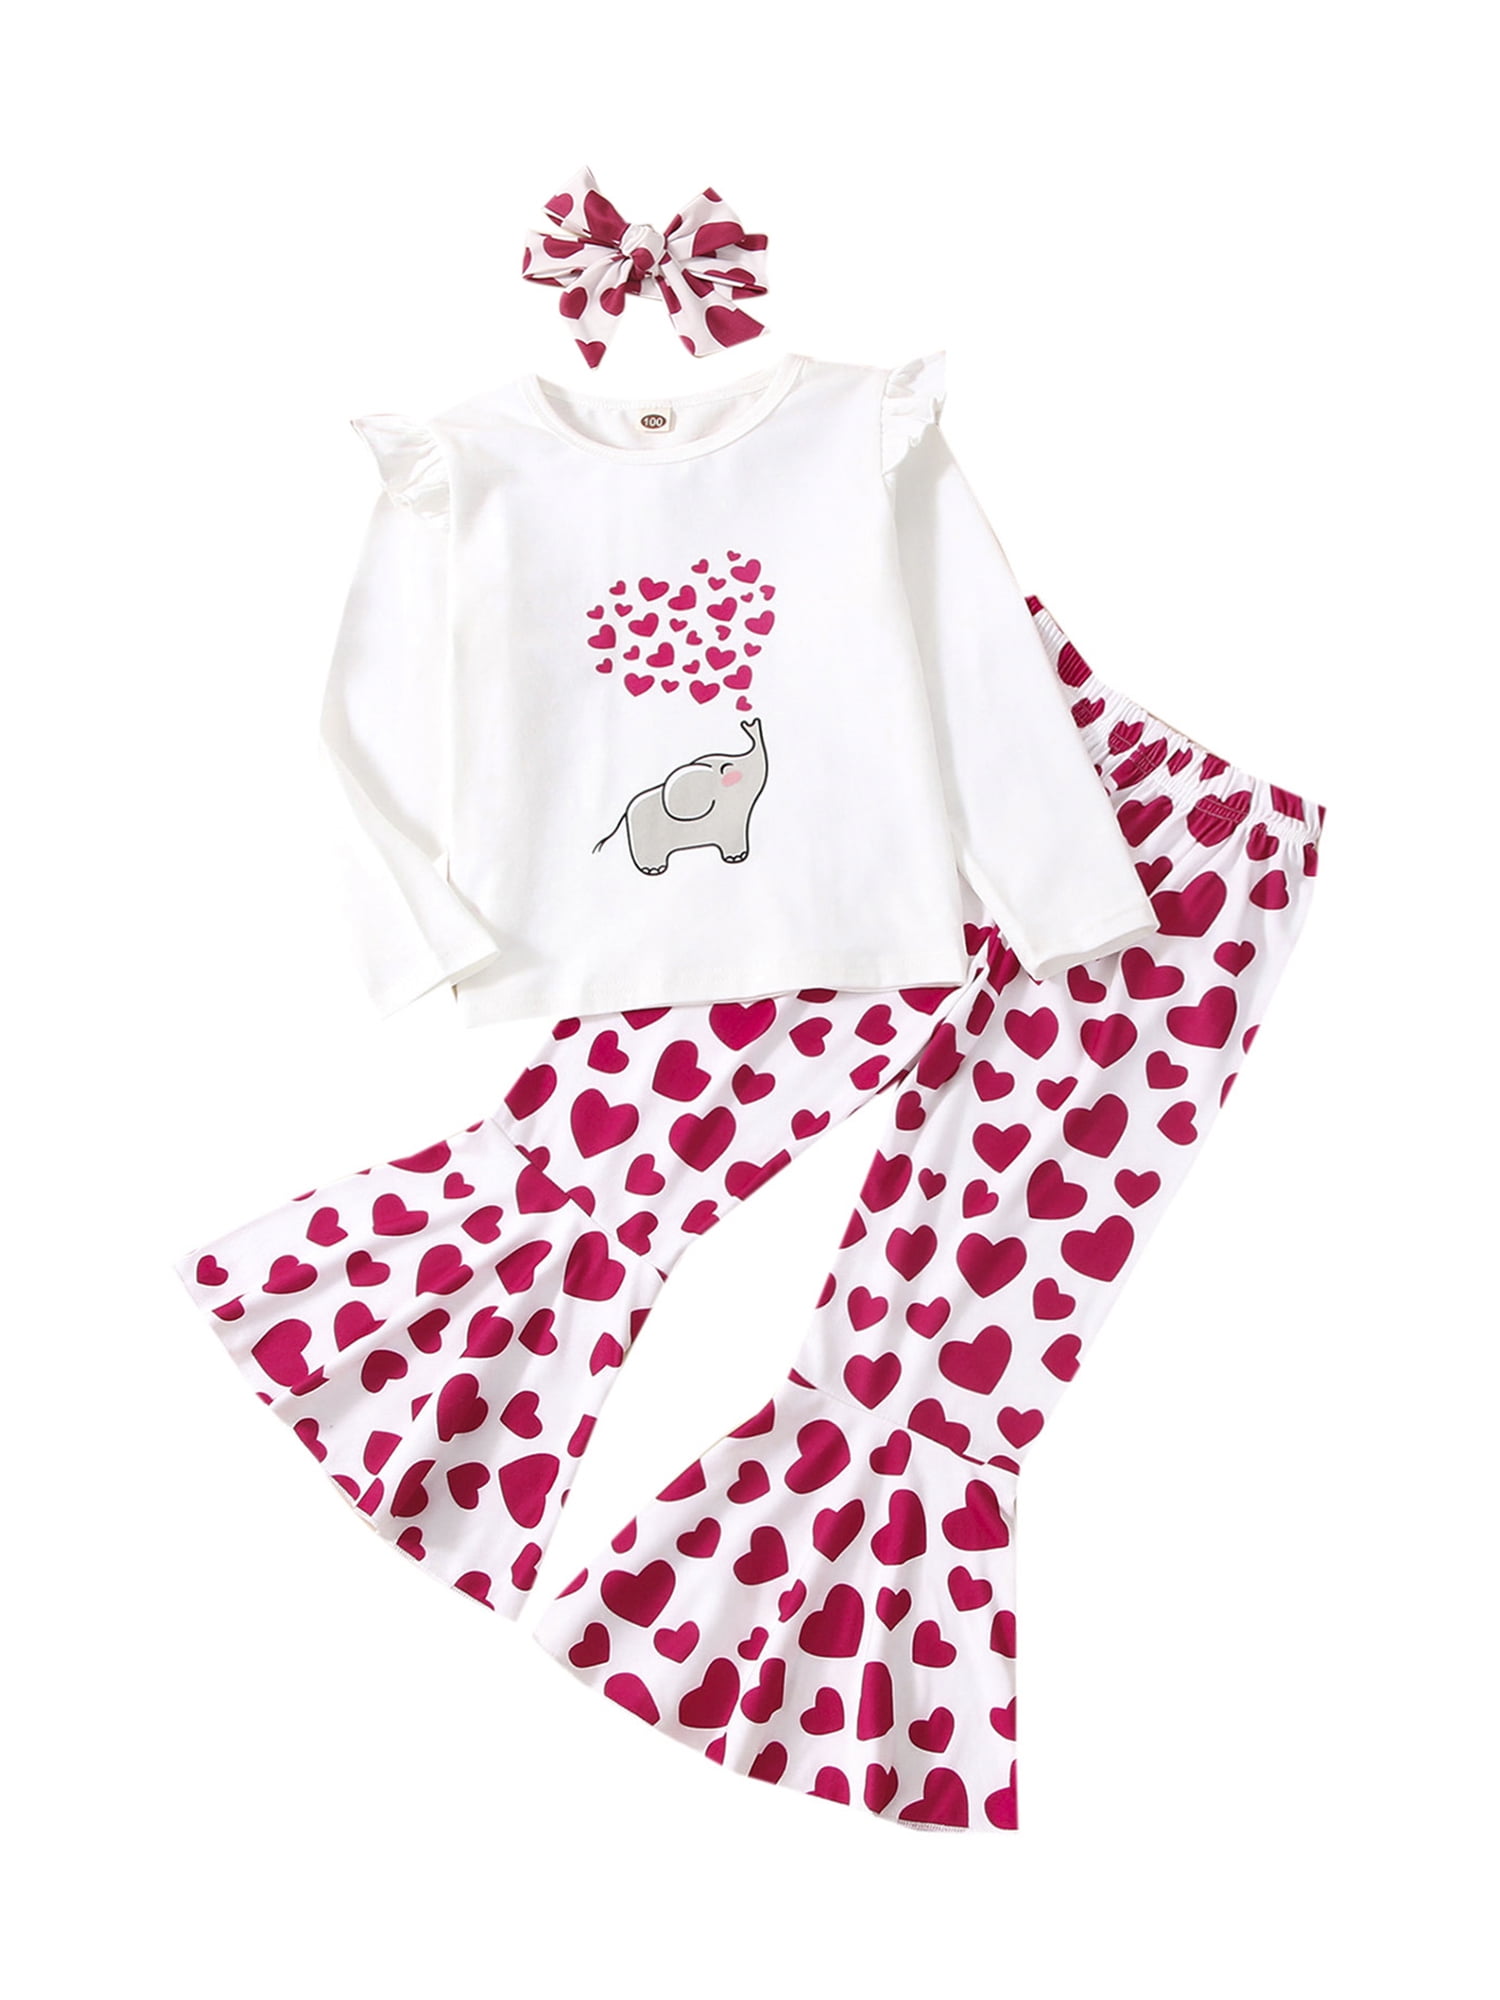 3PCS Newborn Infant Baby Girls Valentines Day Clothes Long Sleeve Sweatshirt Tops Long Pants with Headband Outfits Set 